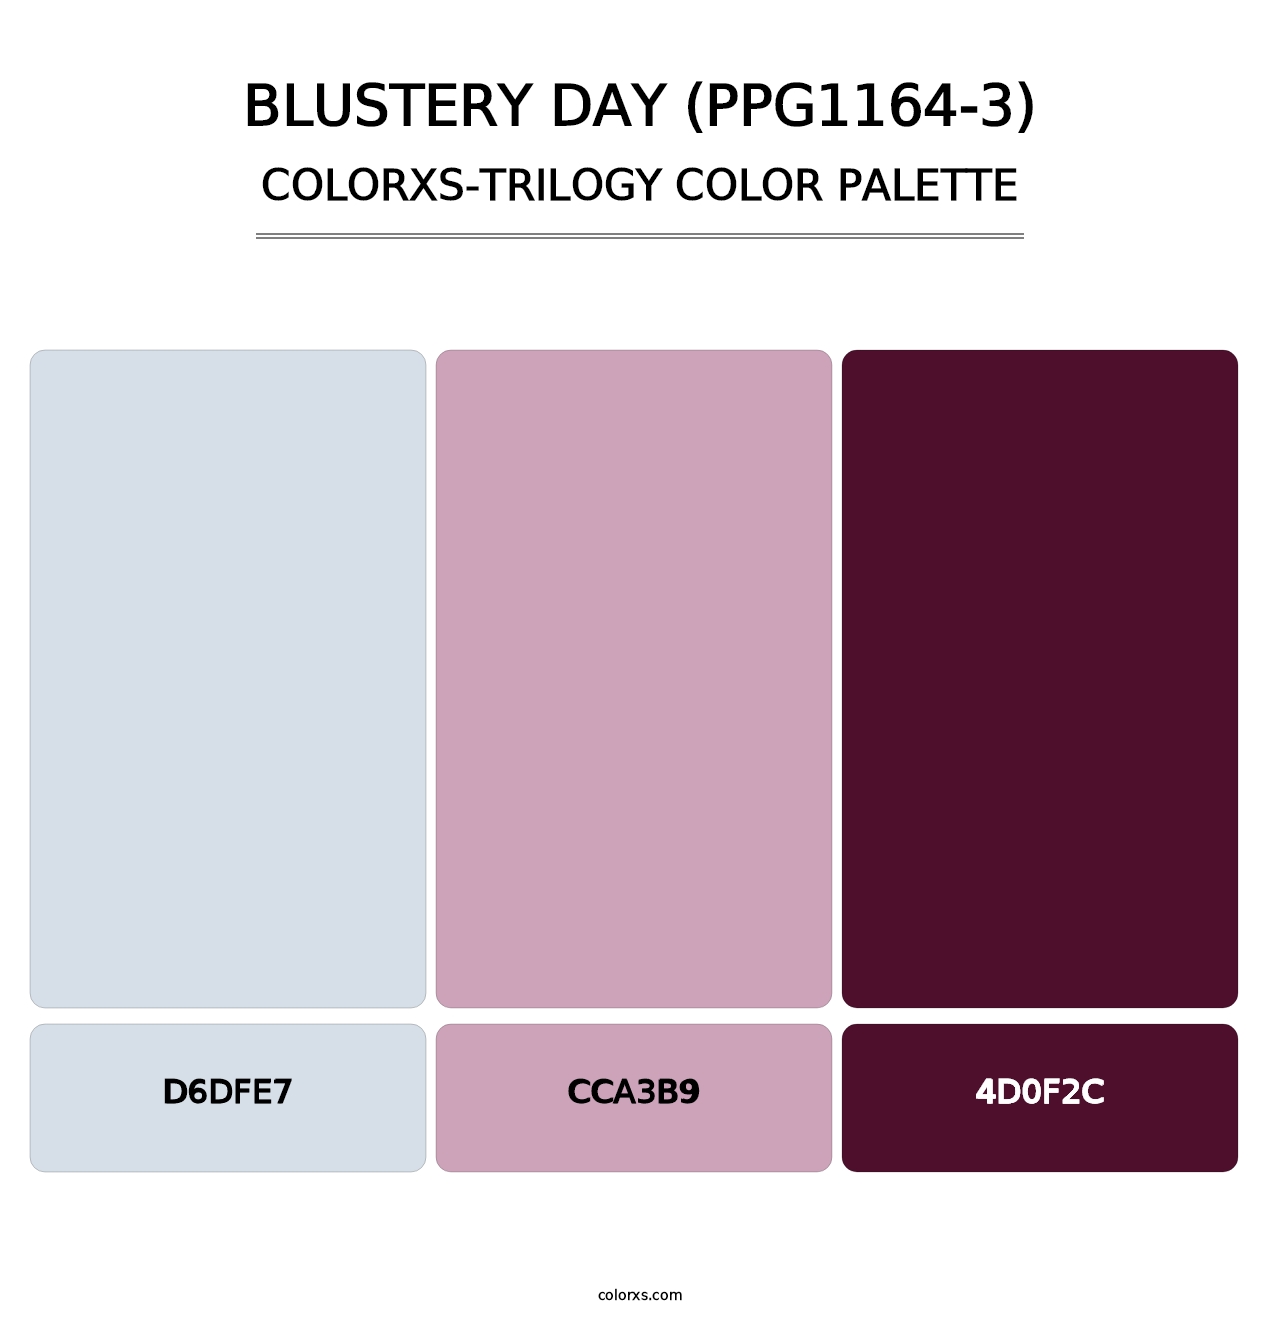 Blustery Day (PPG1164-3) - Colorxs Trilogy Palette